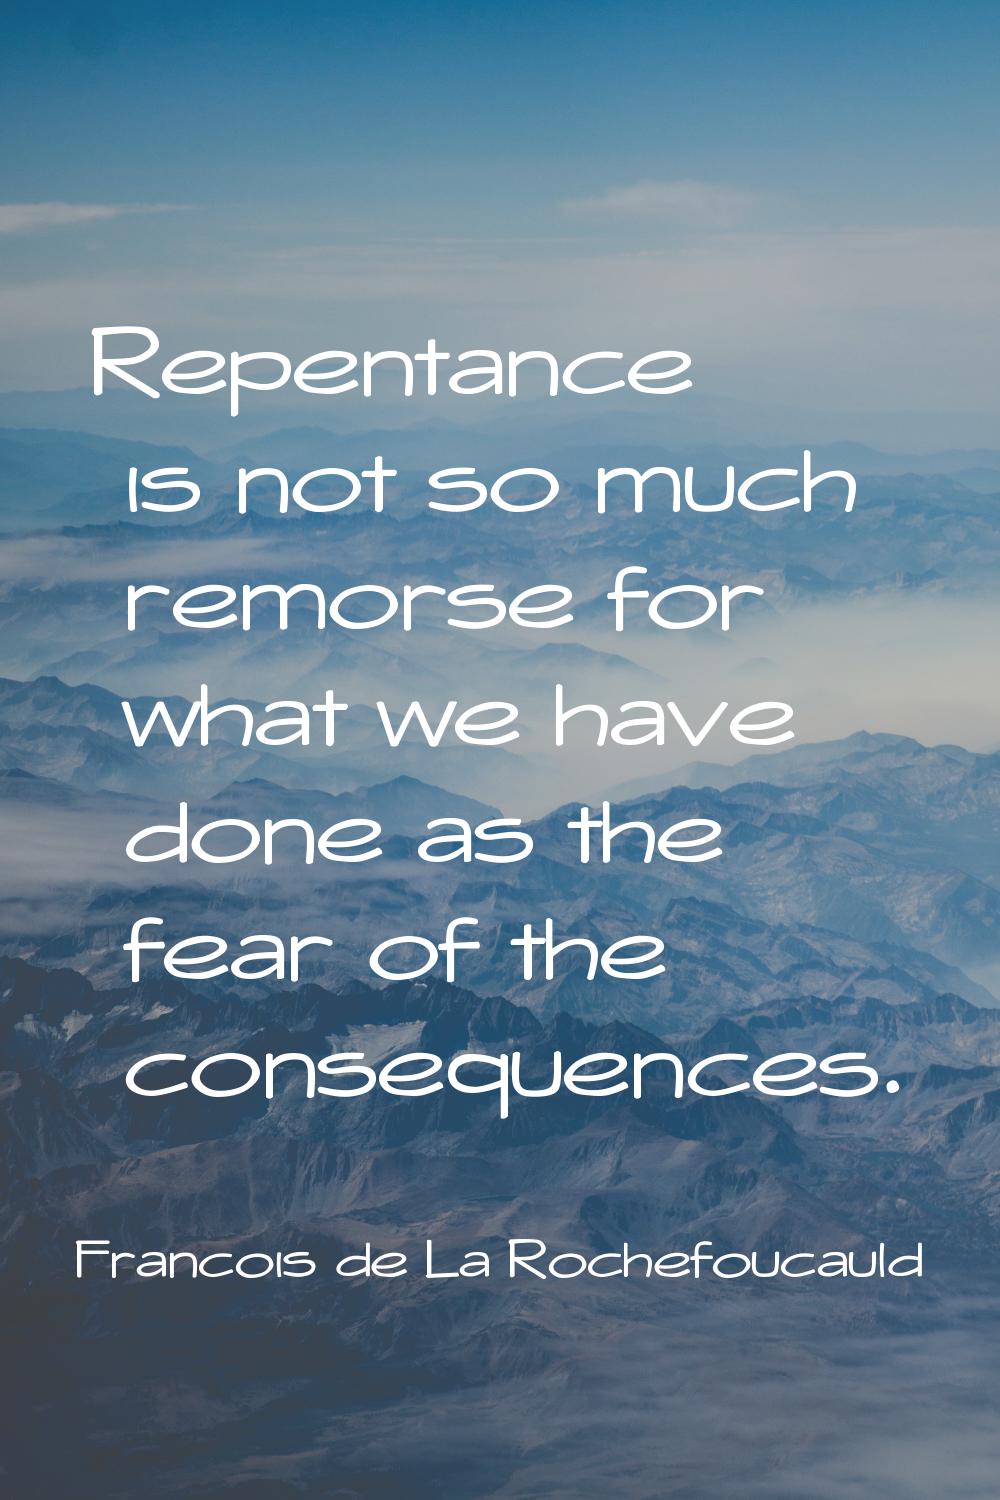 Repentance is not so much remorse for what we have done as the fear of the consequences.